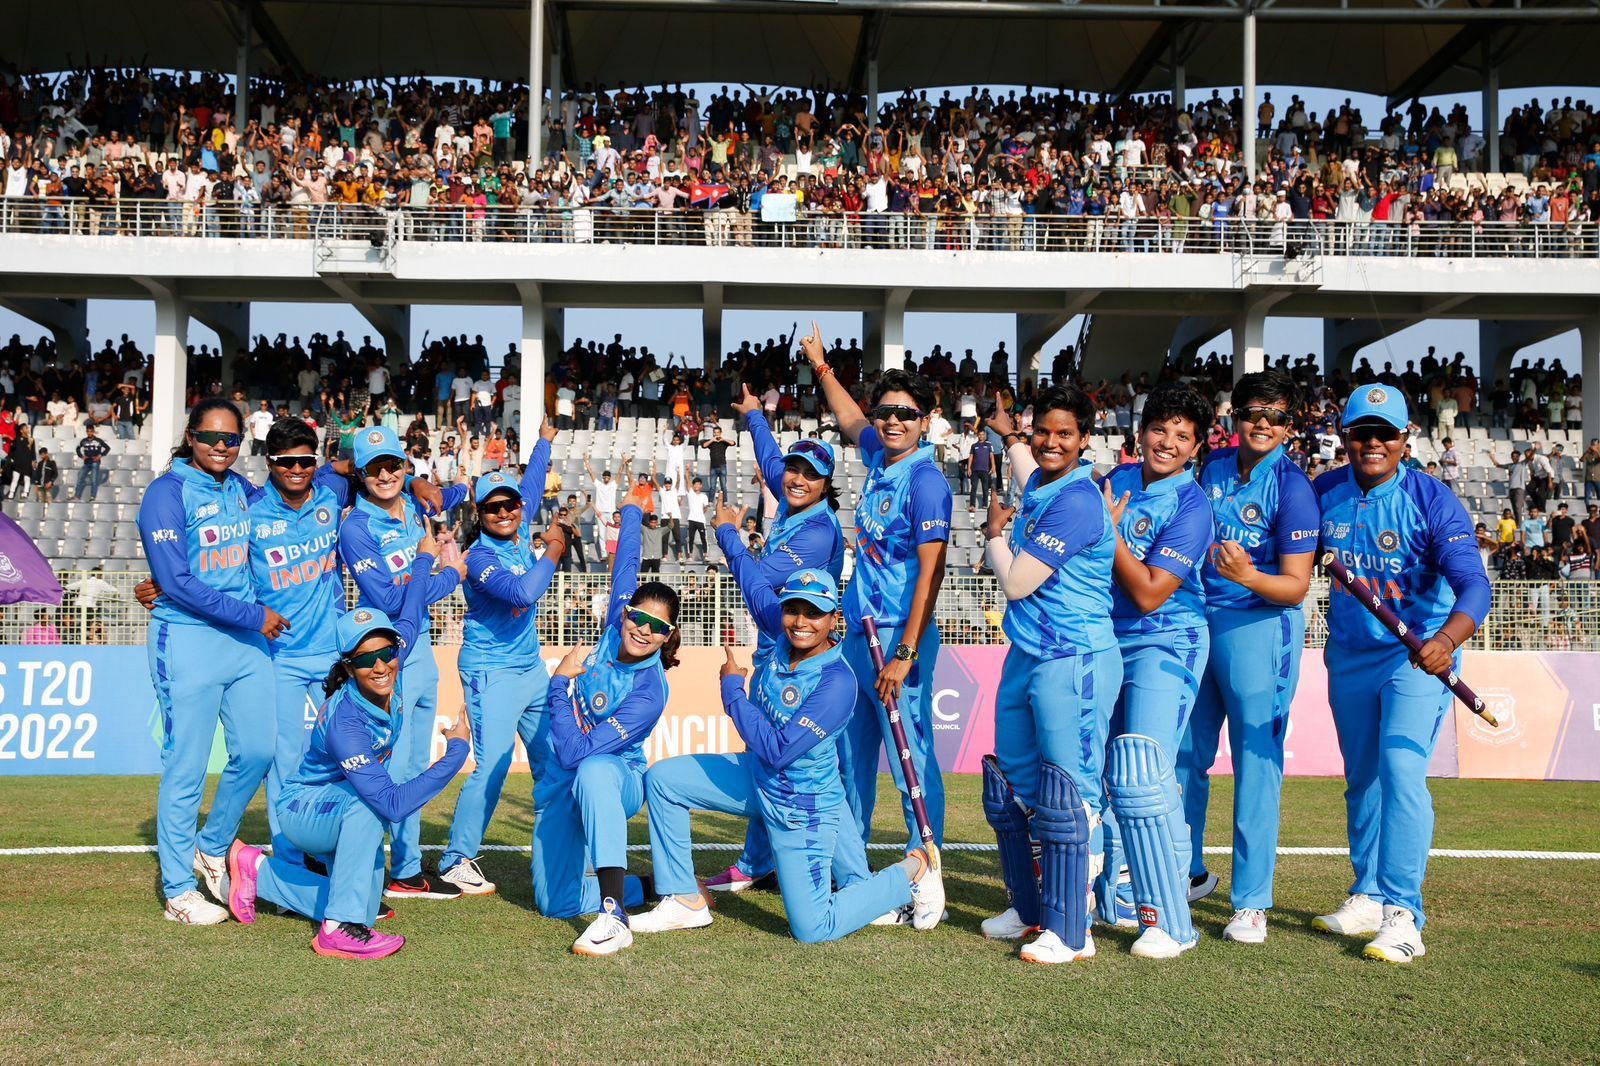 Equal match fee for men and women cricketers: BCCI 